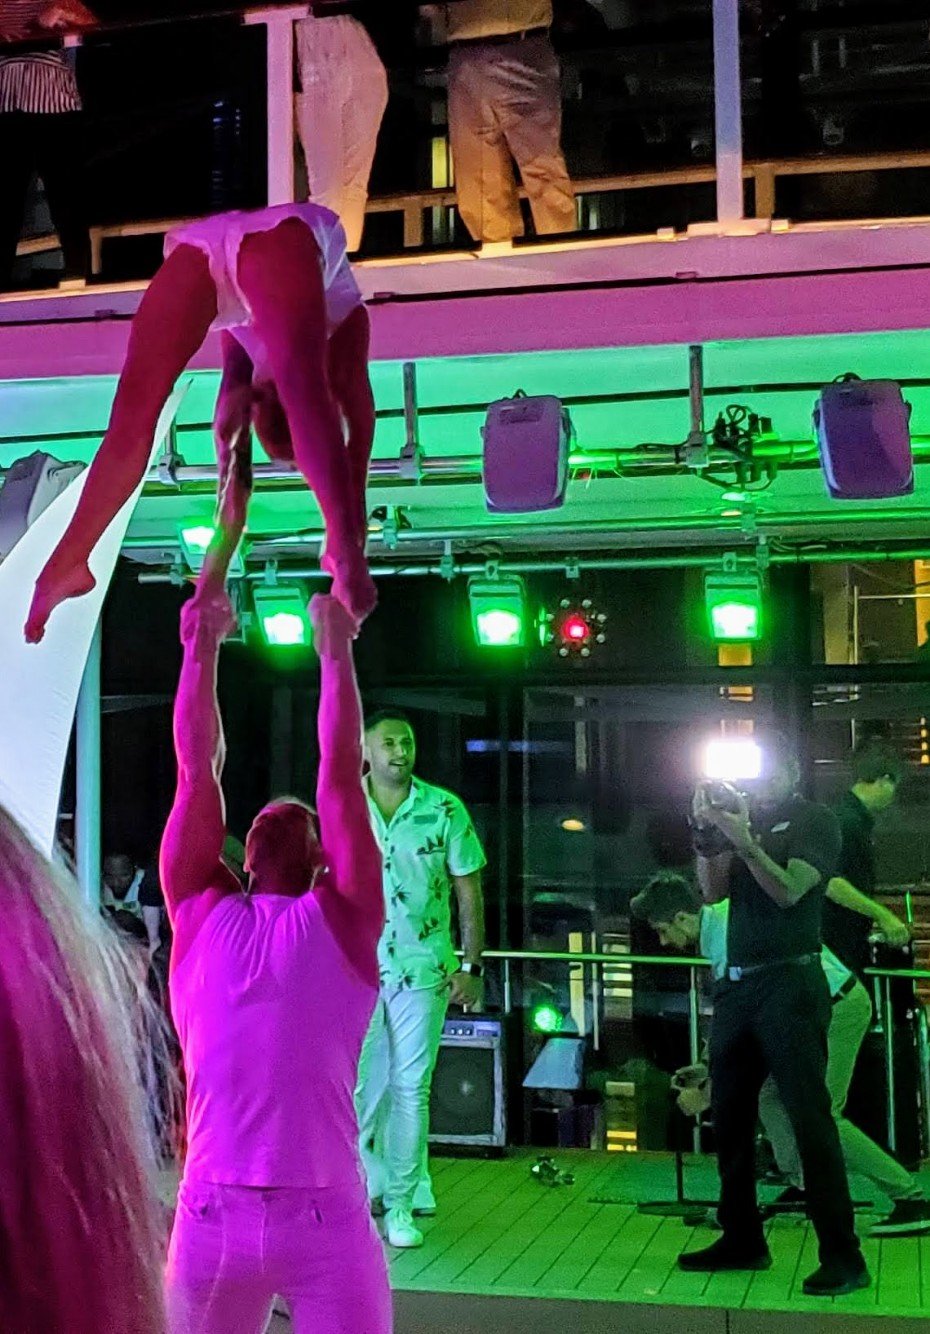 Acrobats at Celebrity Equinox's Full Moon Party